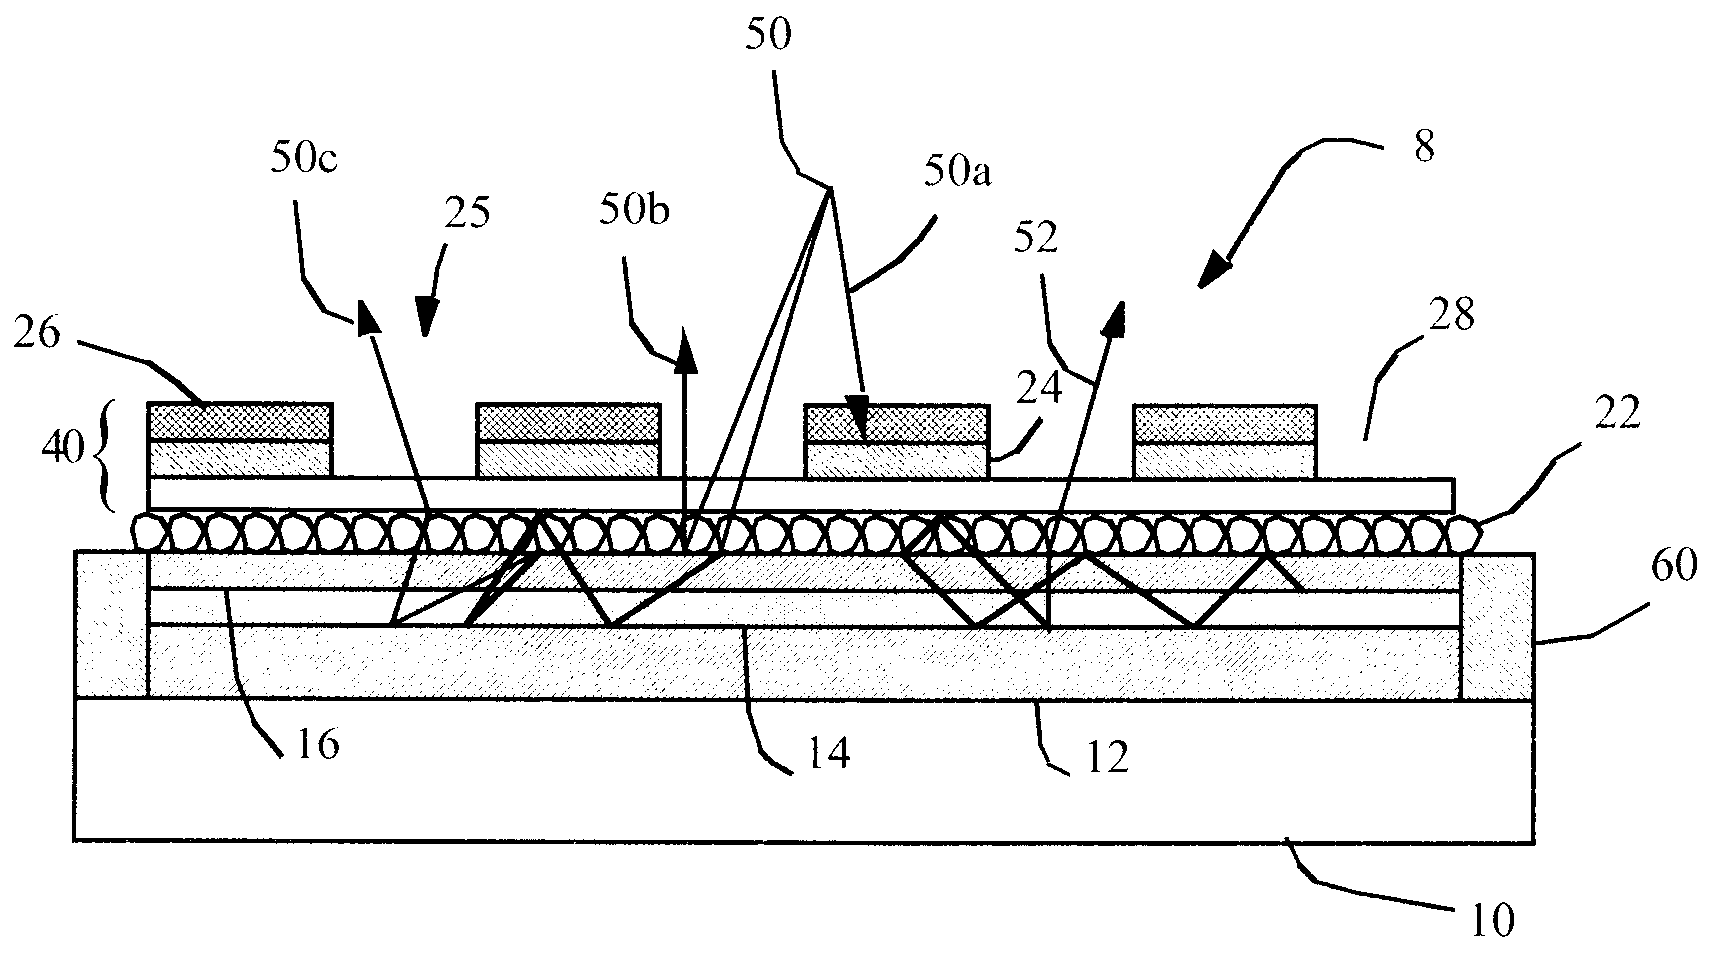 Electroluminescent device having improved contrast